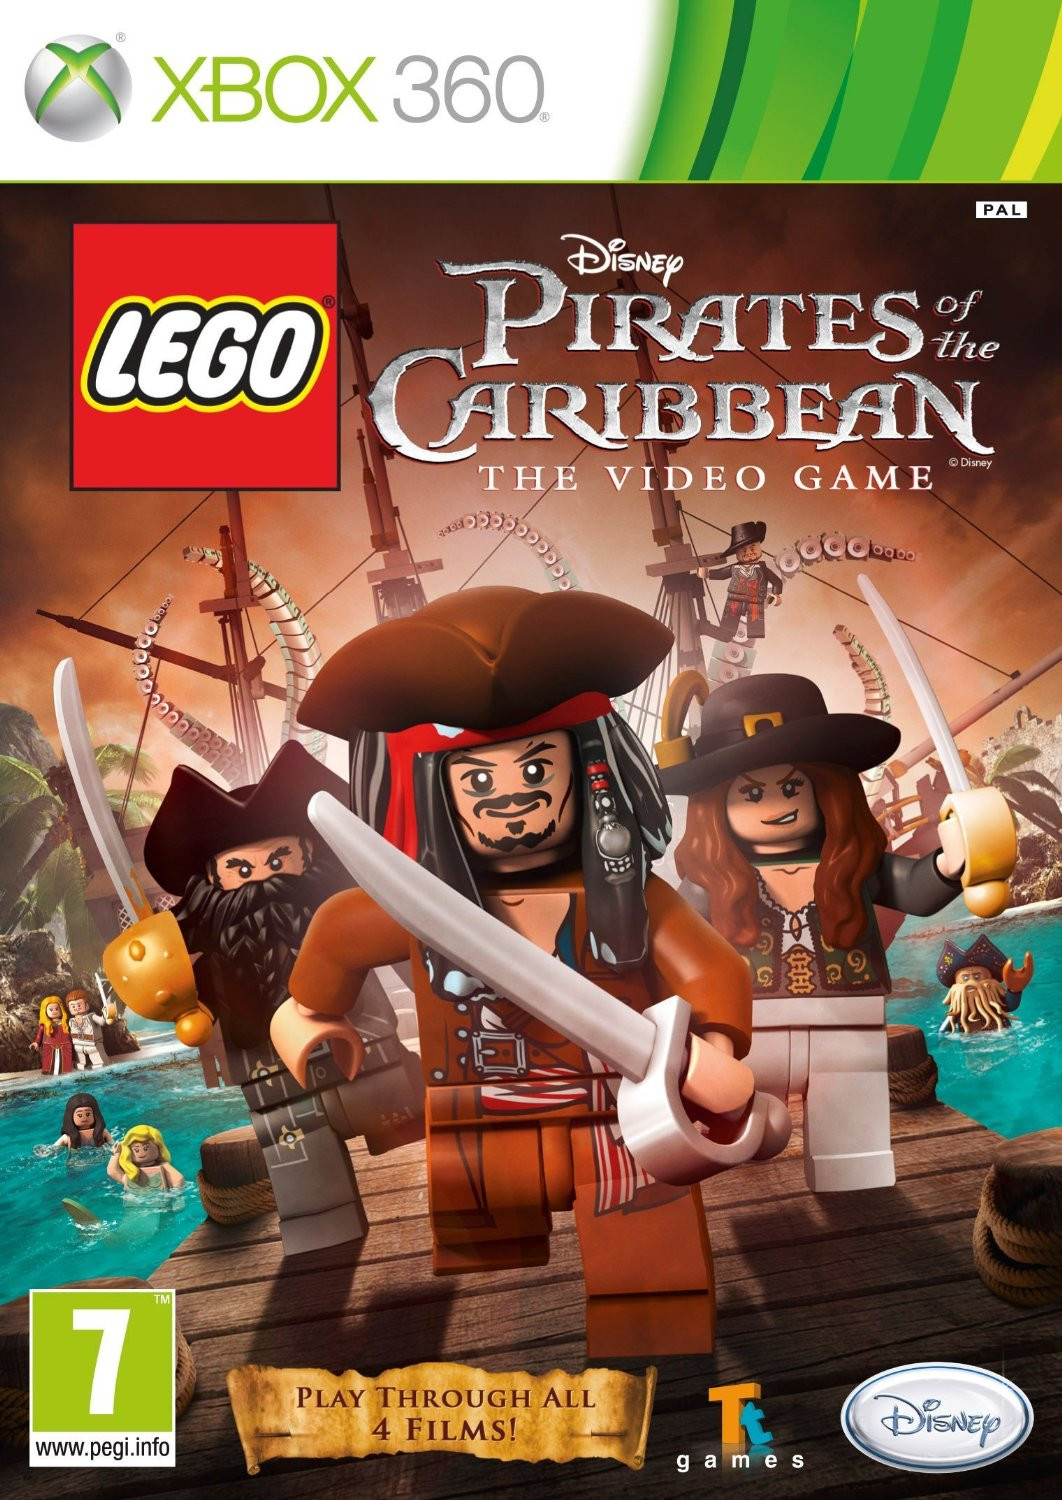 buy-lego-pirates-of-the-caribbean-xbox-360-from-31-98-today-best-deals-on-idealo-co-uk